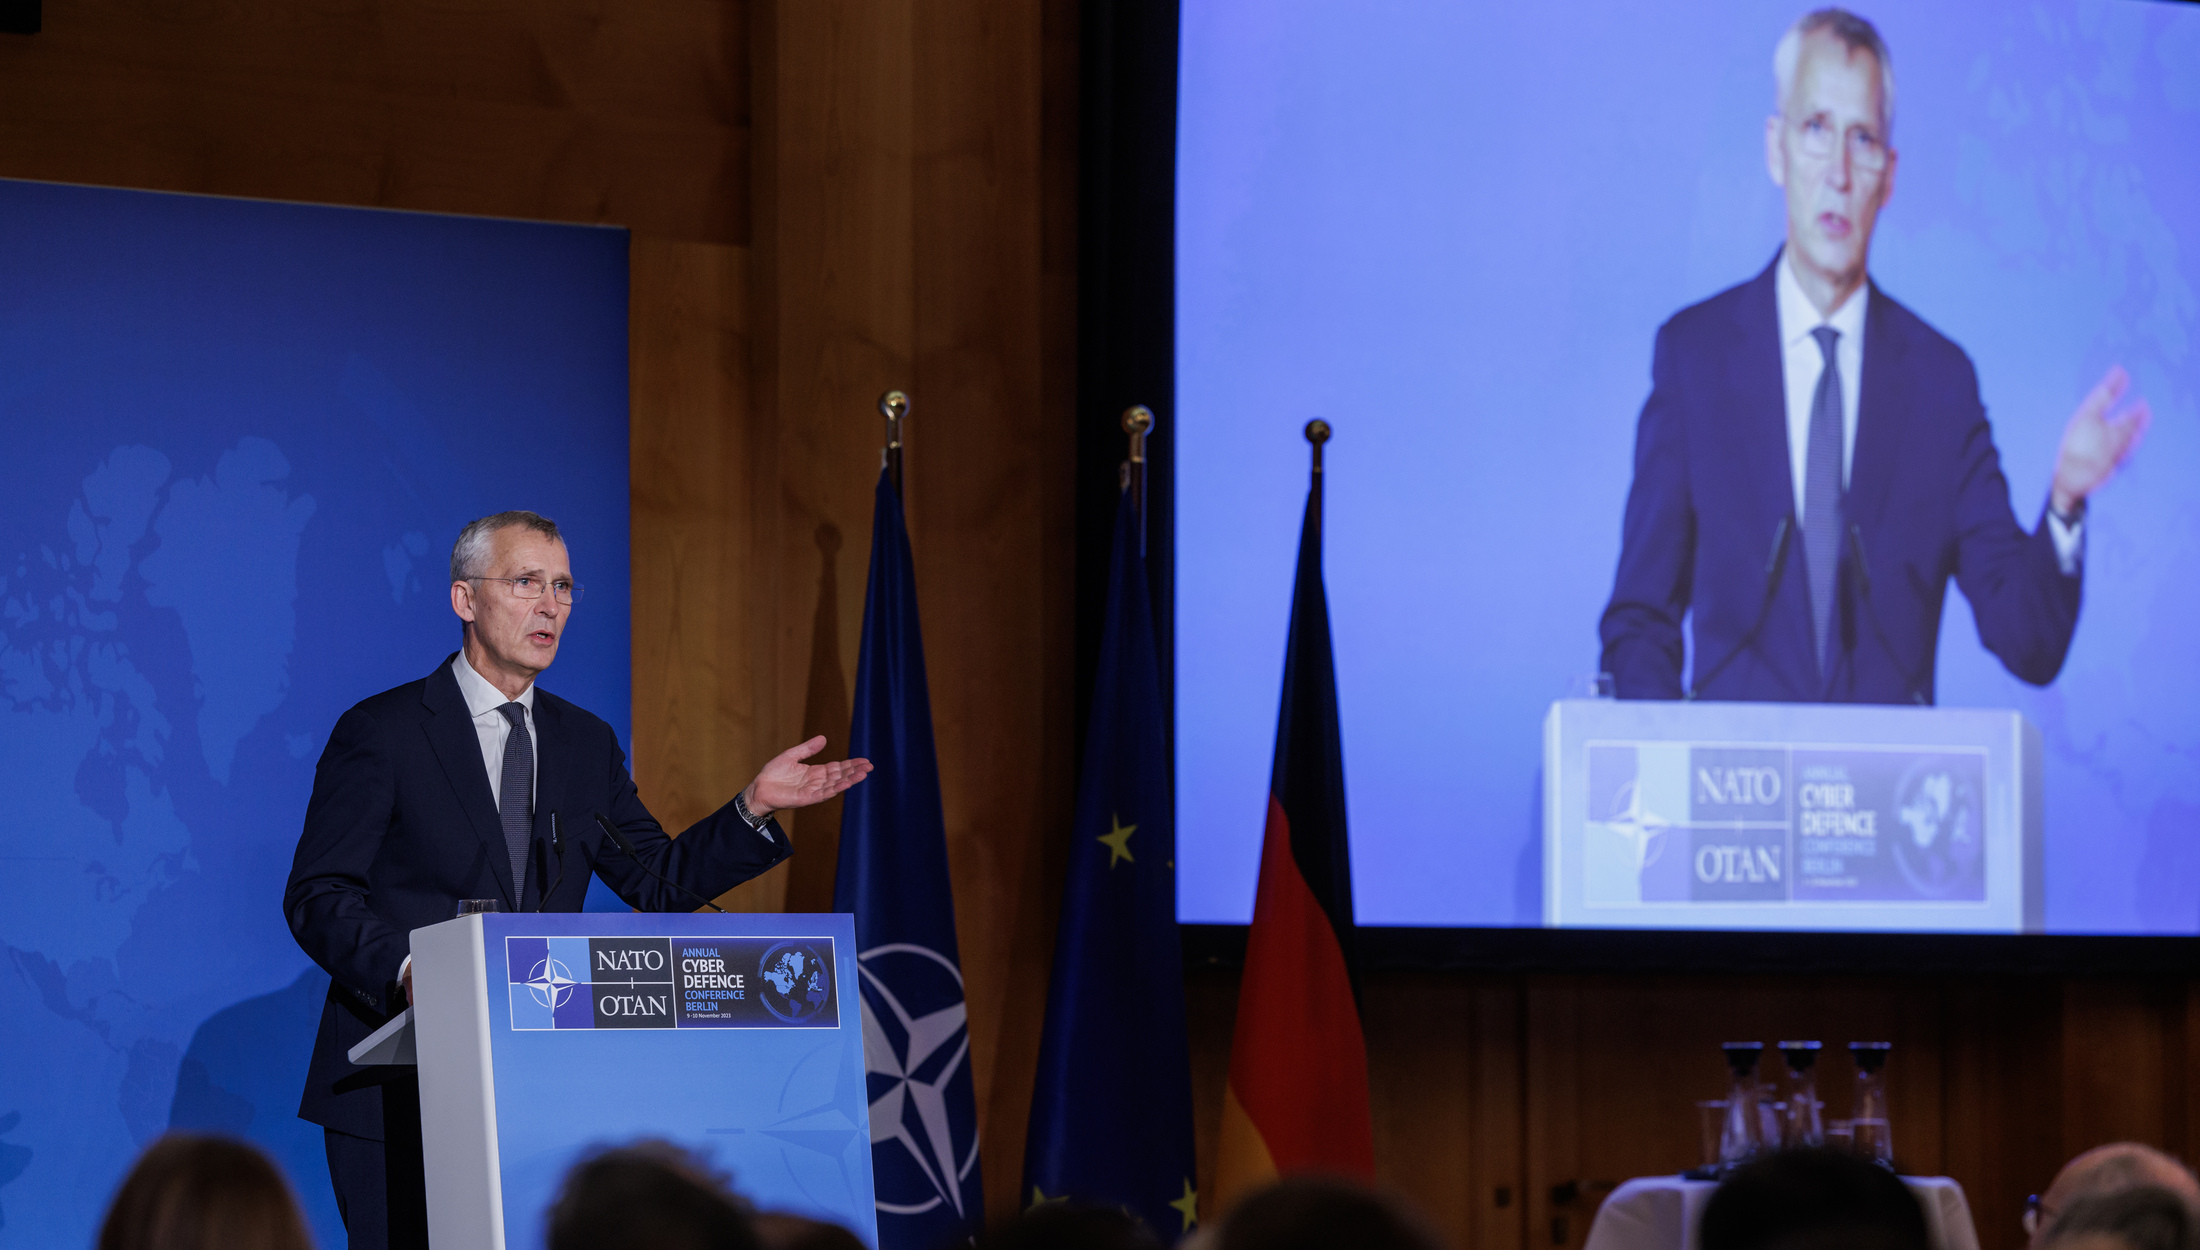 NATO Secretary General Jens Stoltenberg at the first NATO Annual Cyber Defence Conference